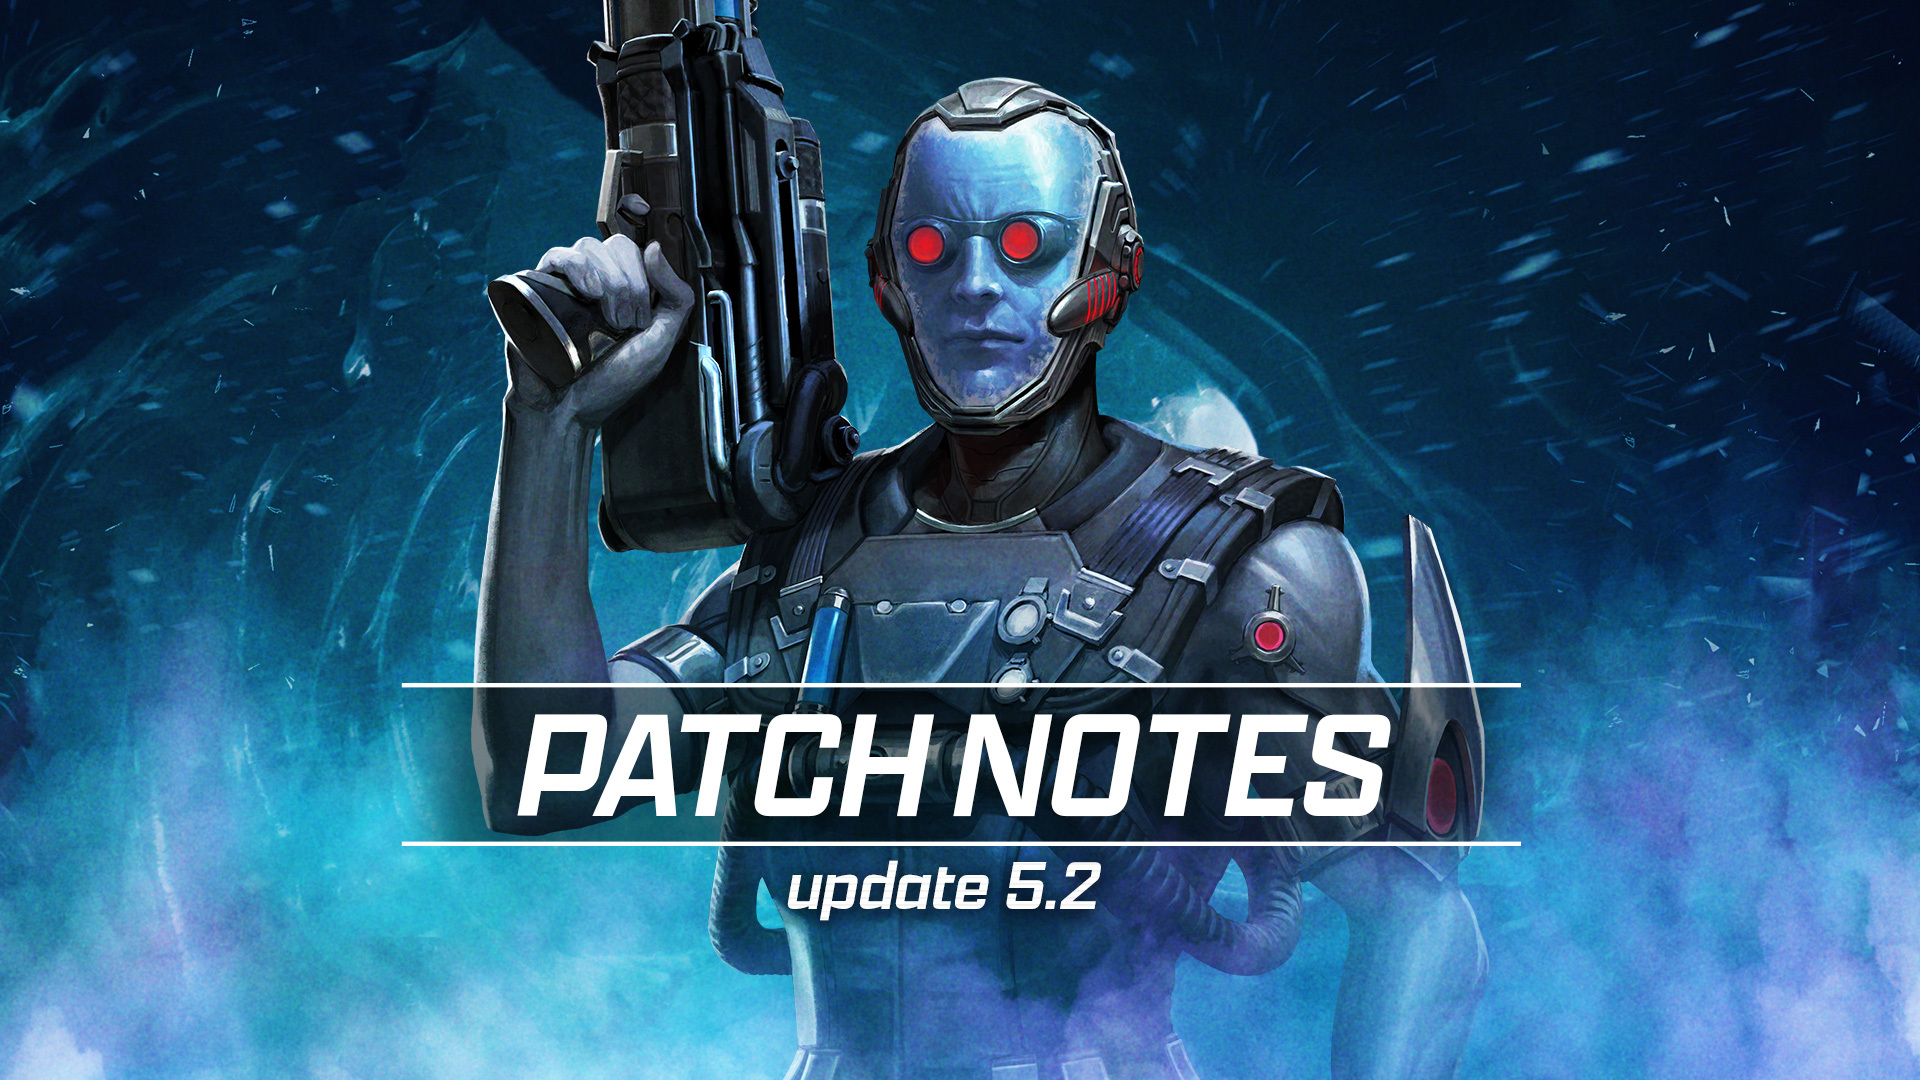 PATCH_NOTES_52_MR_FREEZE.jpg